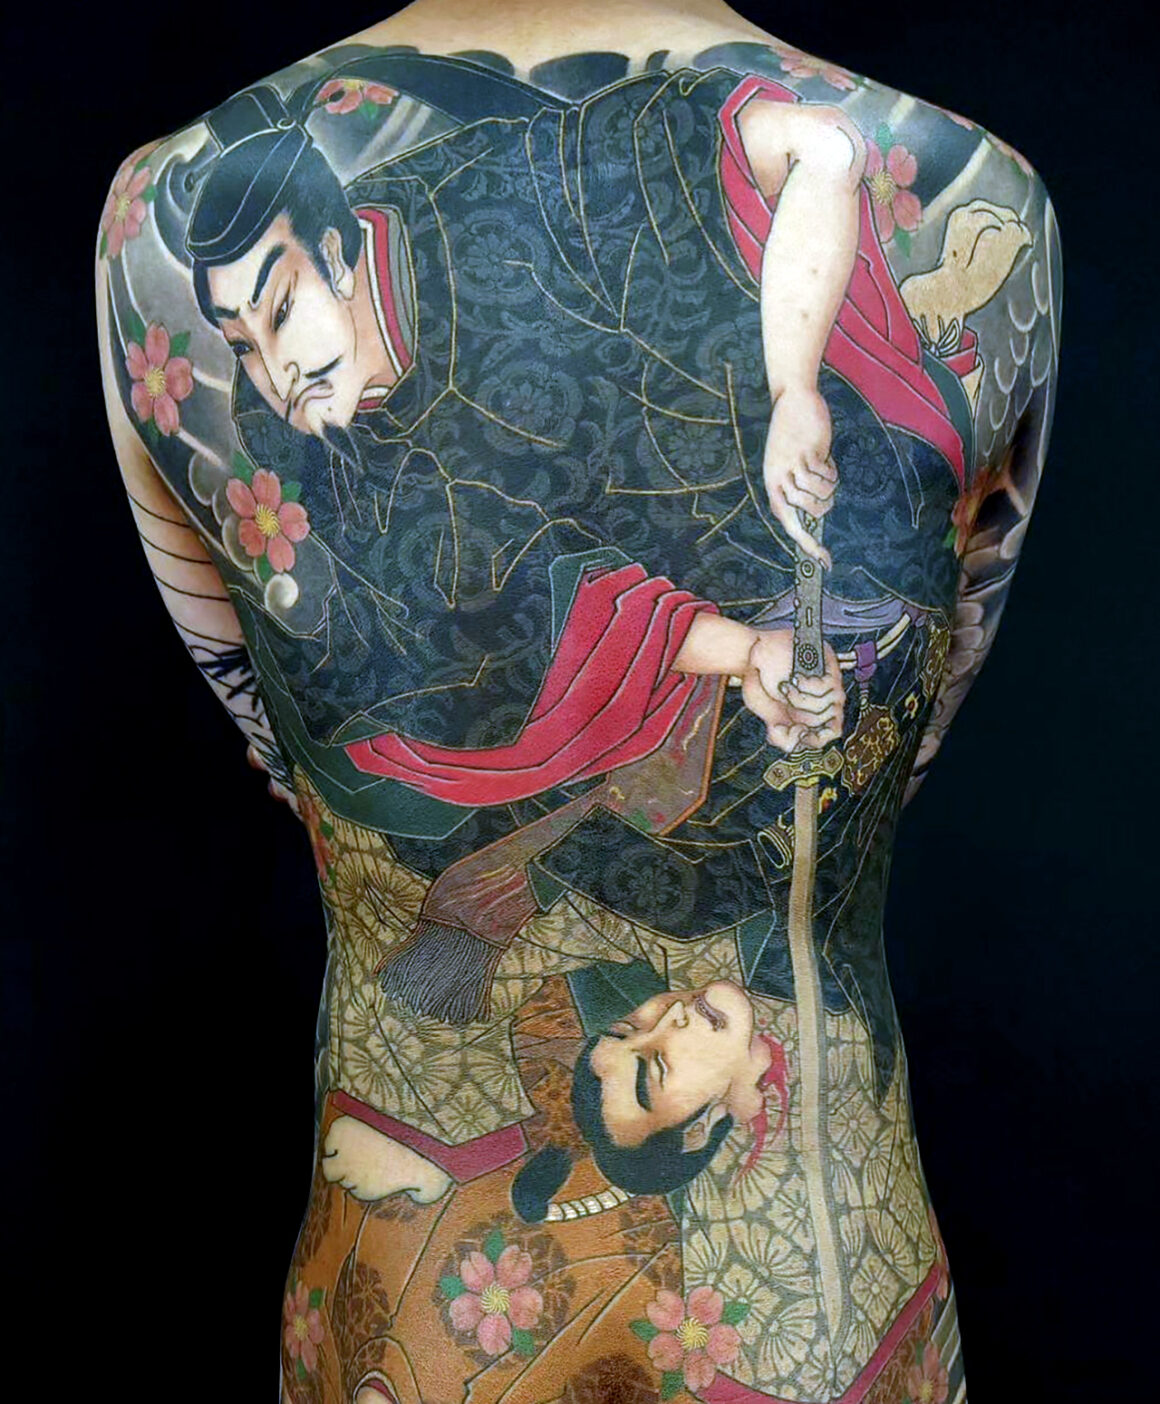 Japanese tattoos. From the Ukiyo-e to the Neo-Japanese style - Tattoo Life